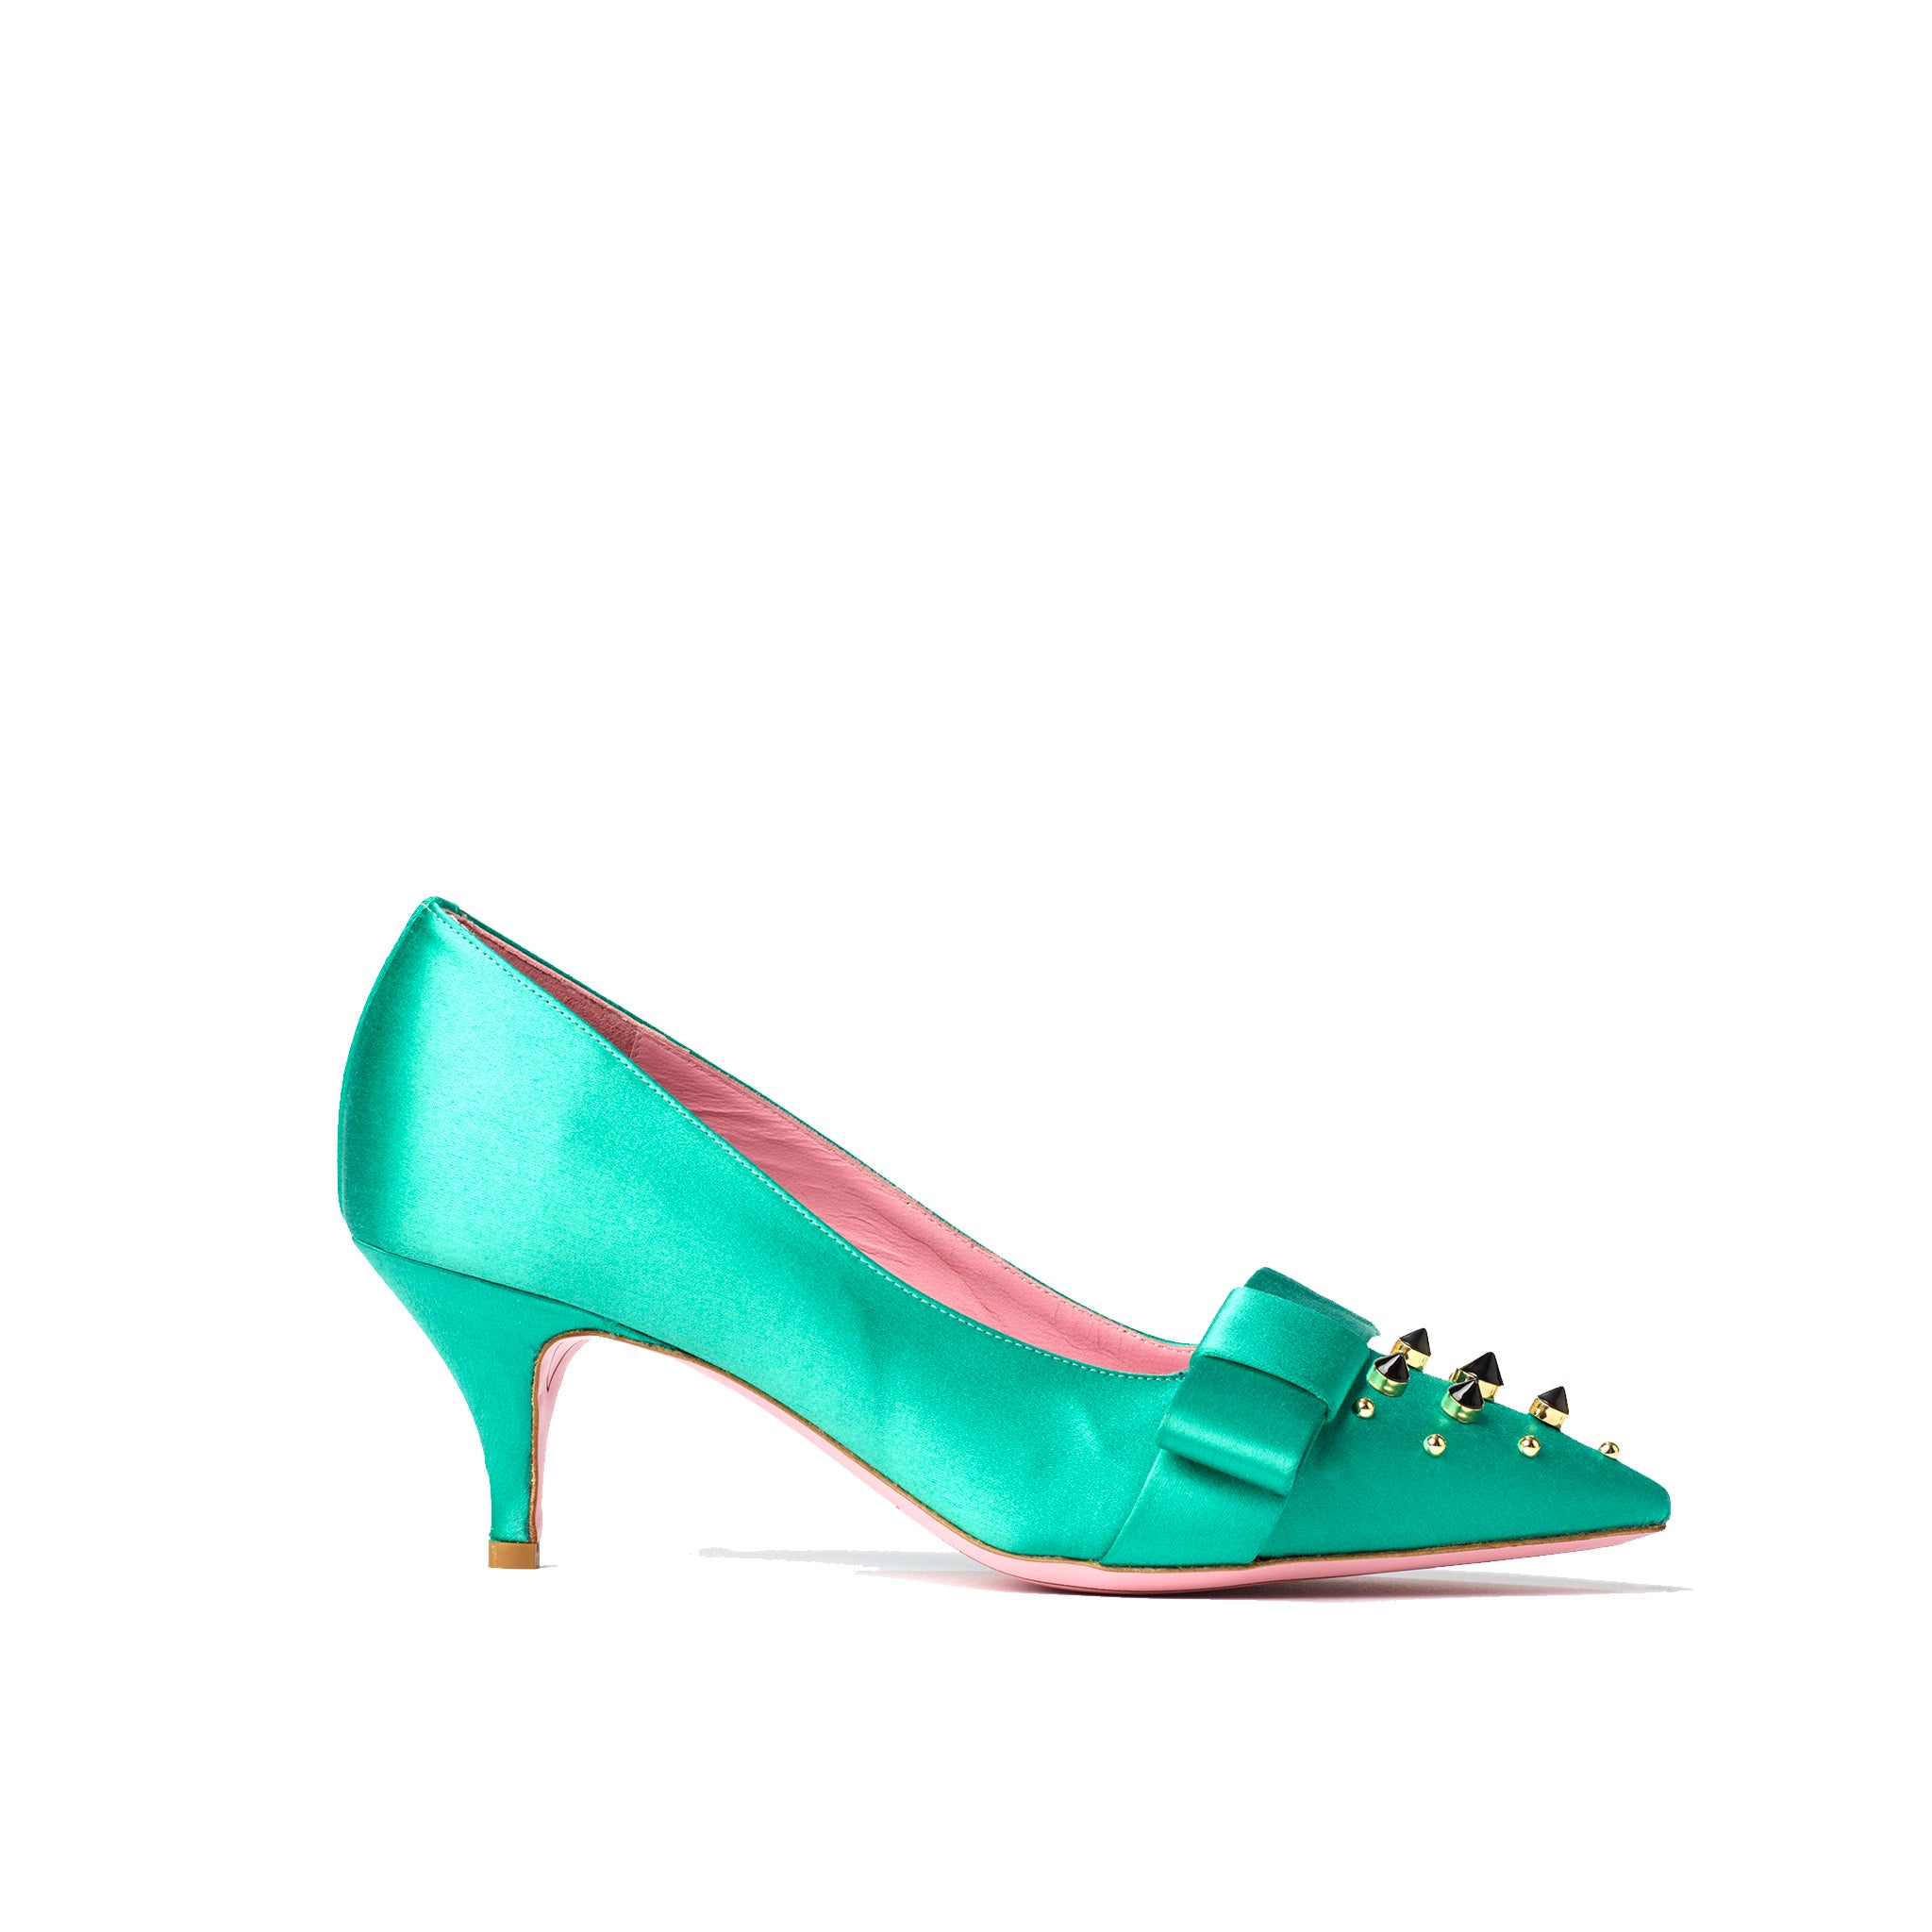 Phare studded kitten heel in verde silk satin with black and gold studs